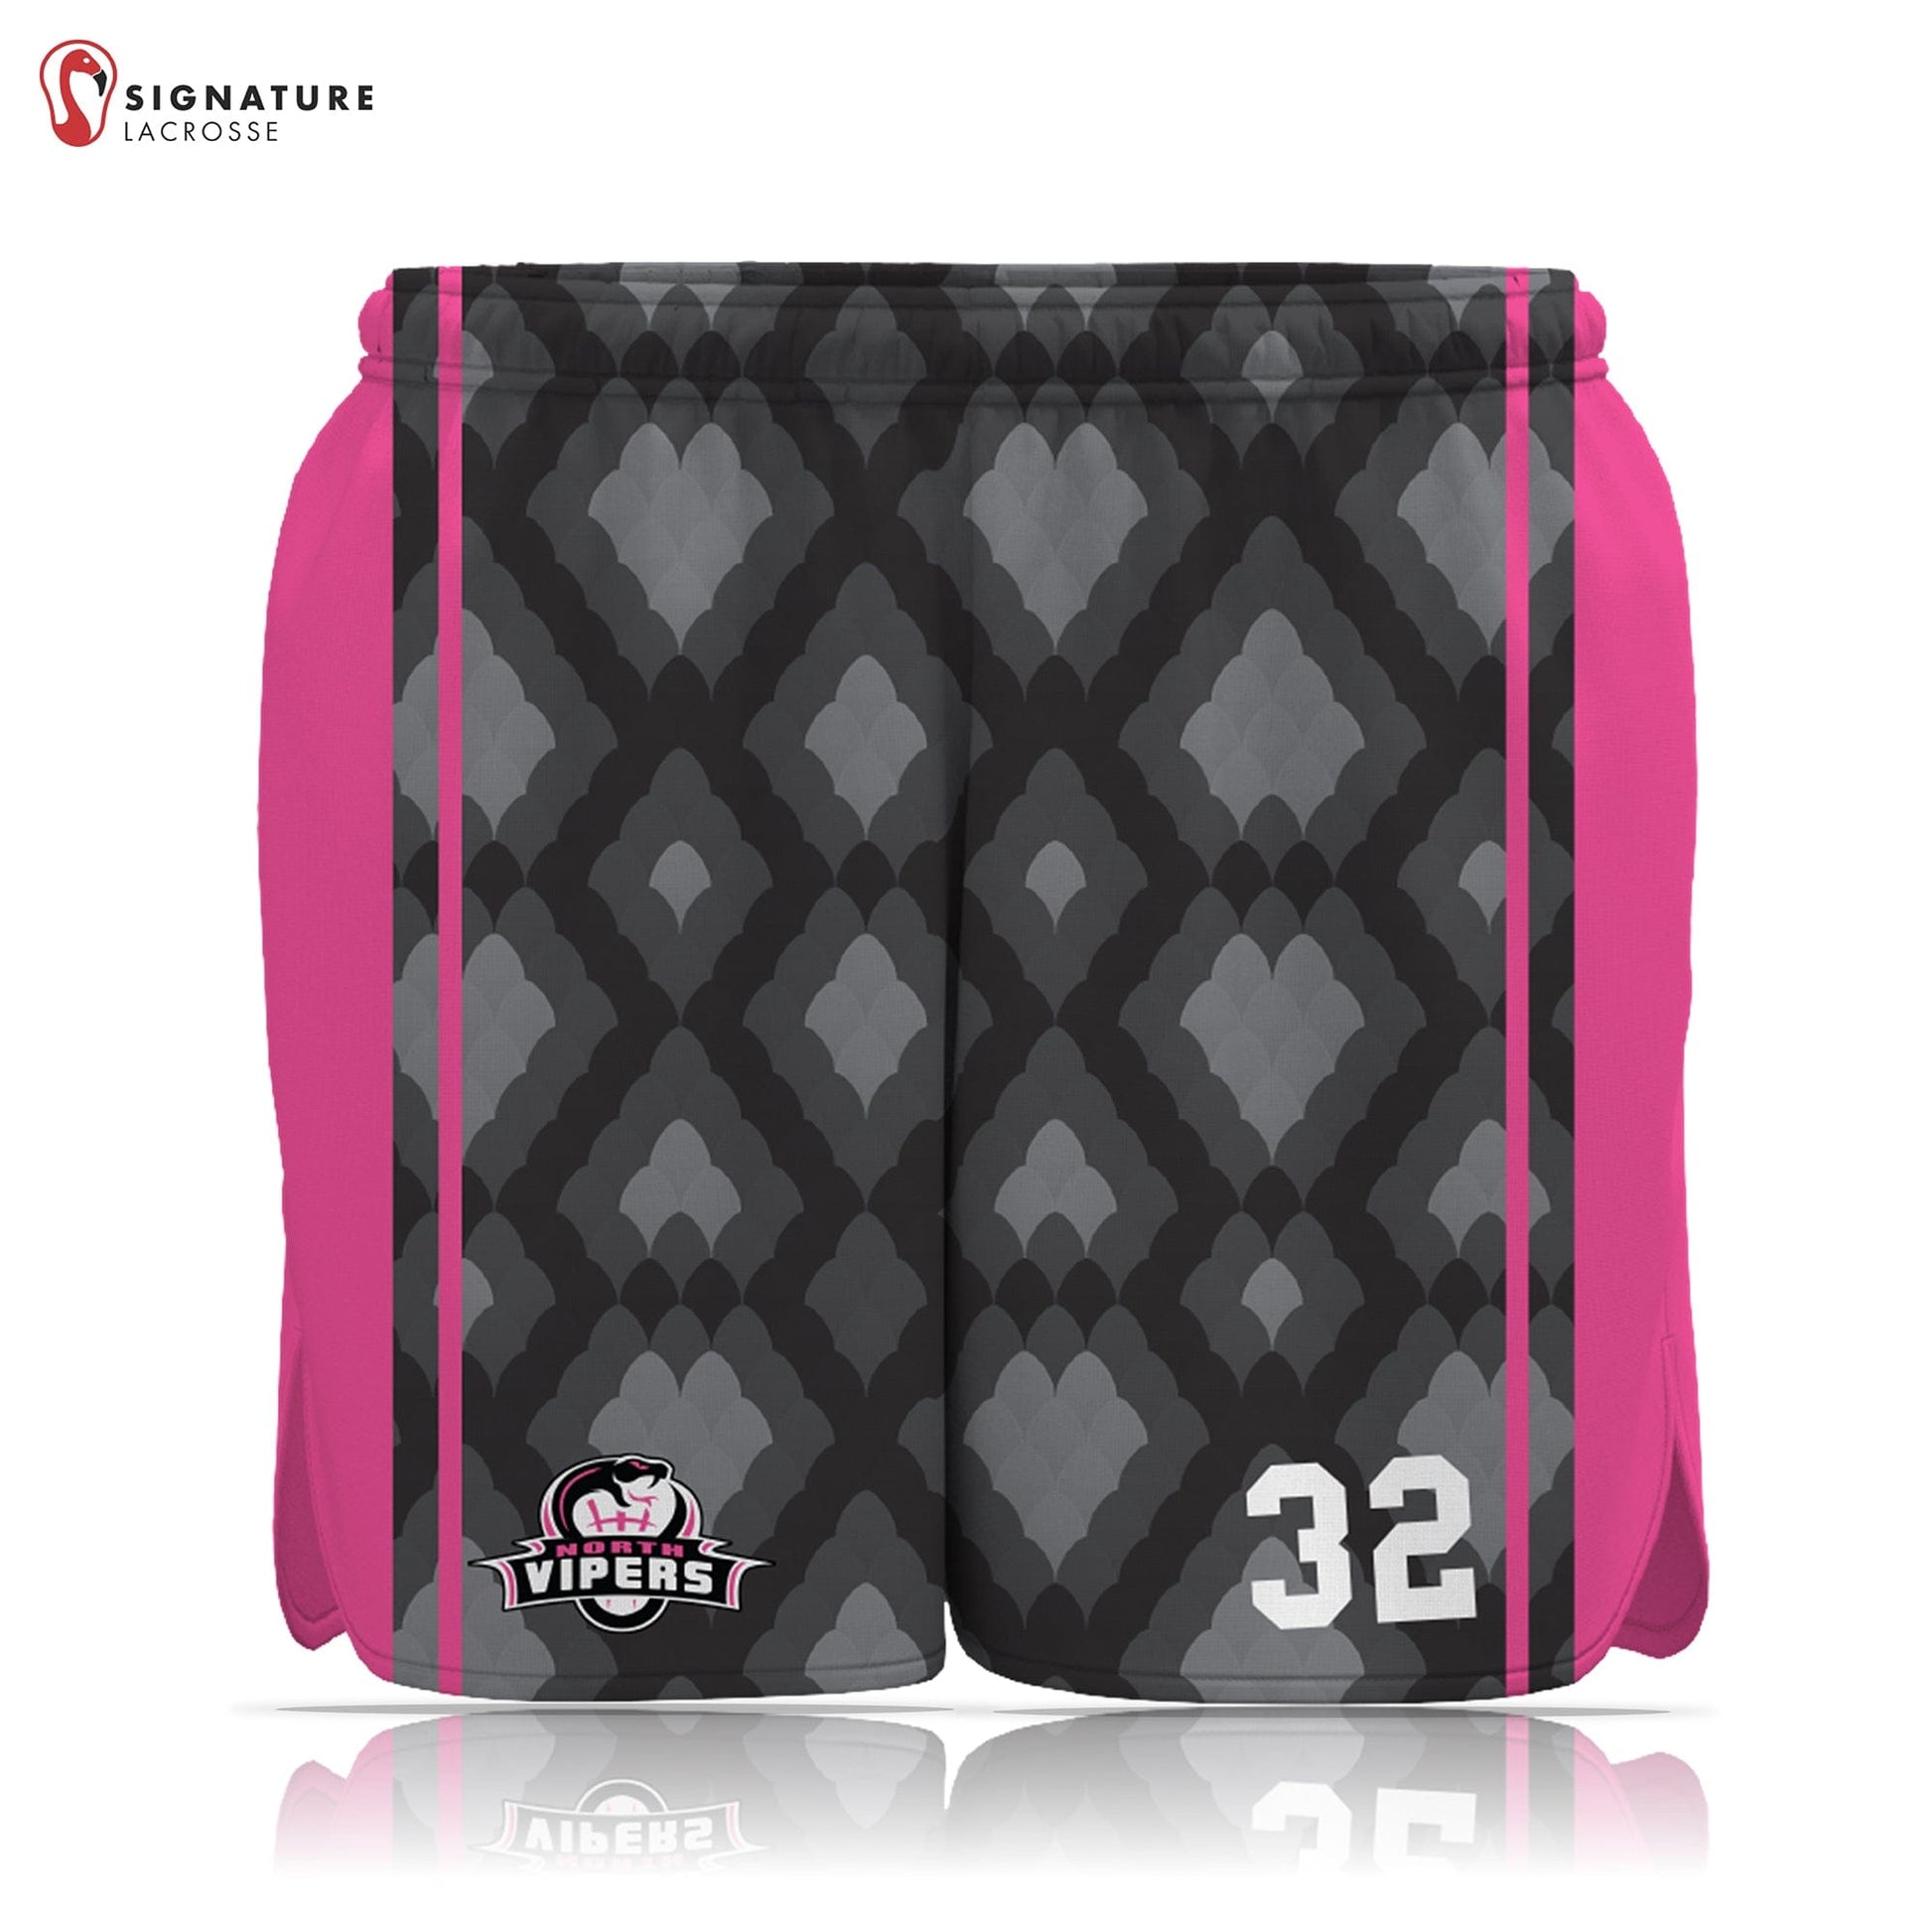 North Vipers Women's 3 Piece Pro Game Package Signature Lacrosse